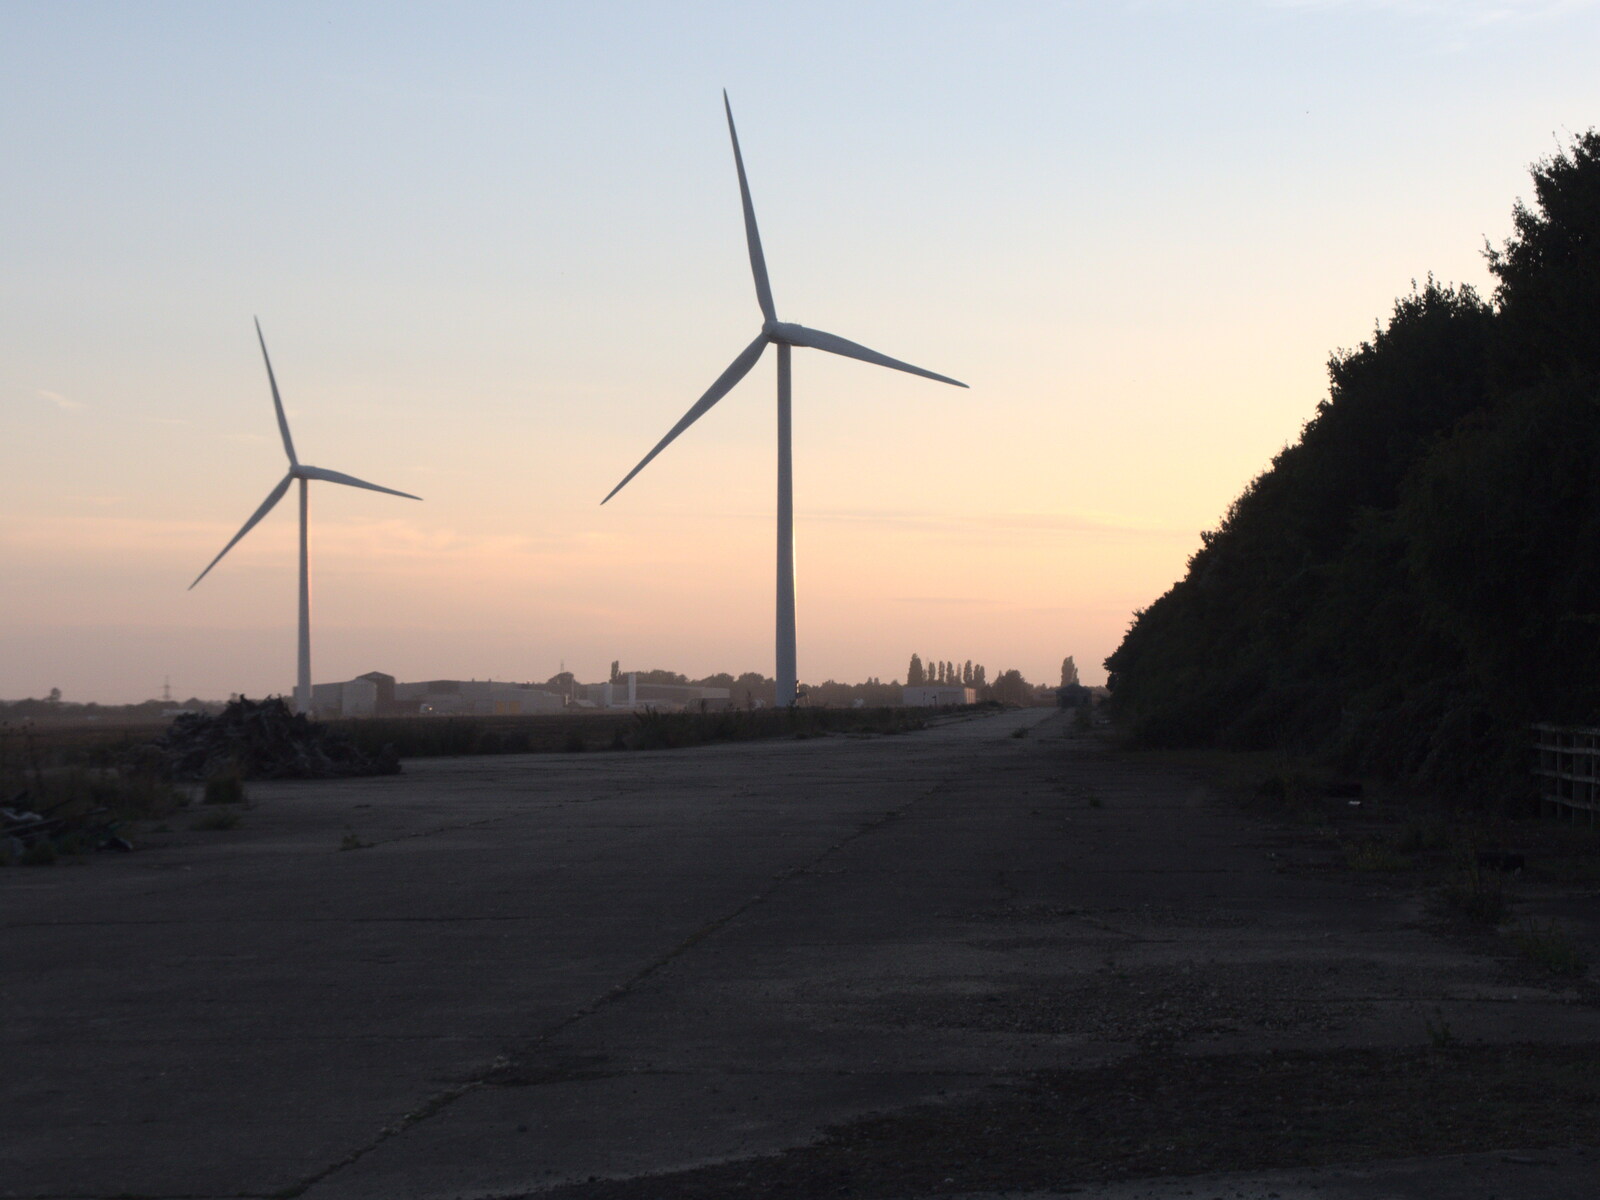 The Last Weavers Ever, Market Hill, Diss, Norfolk - 10th September 2021: Wind turbines in the dusk